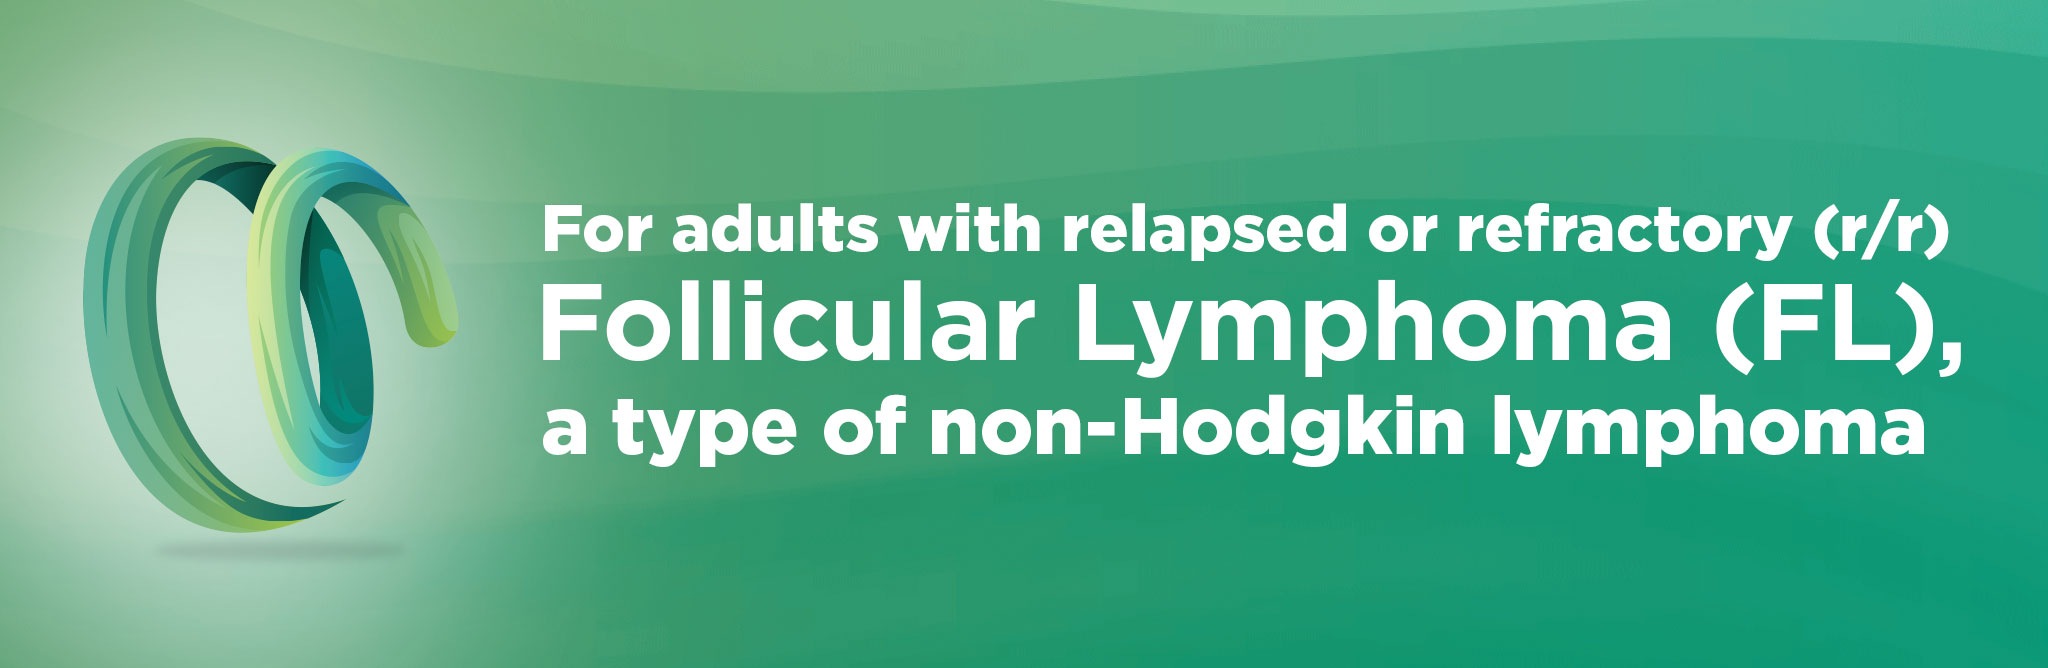 For adults with relapsed refractory (r/r) Follicular Lymphoma (FL), a type of non-Hodgkin lymphoma